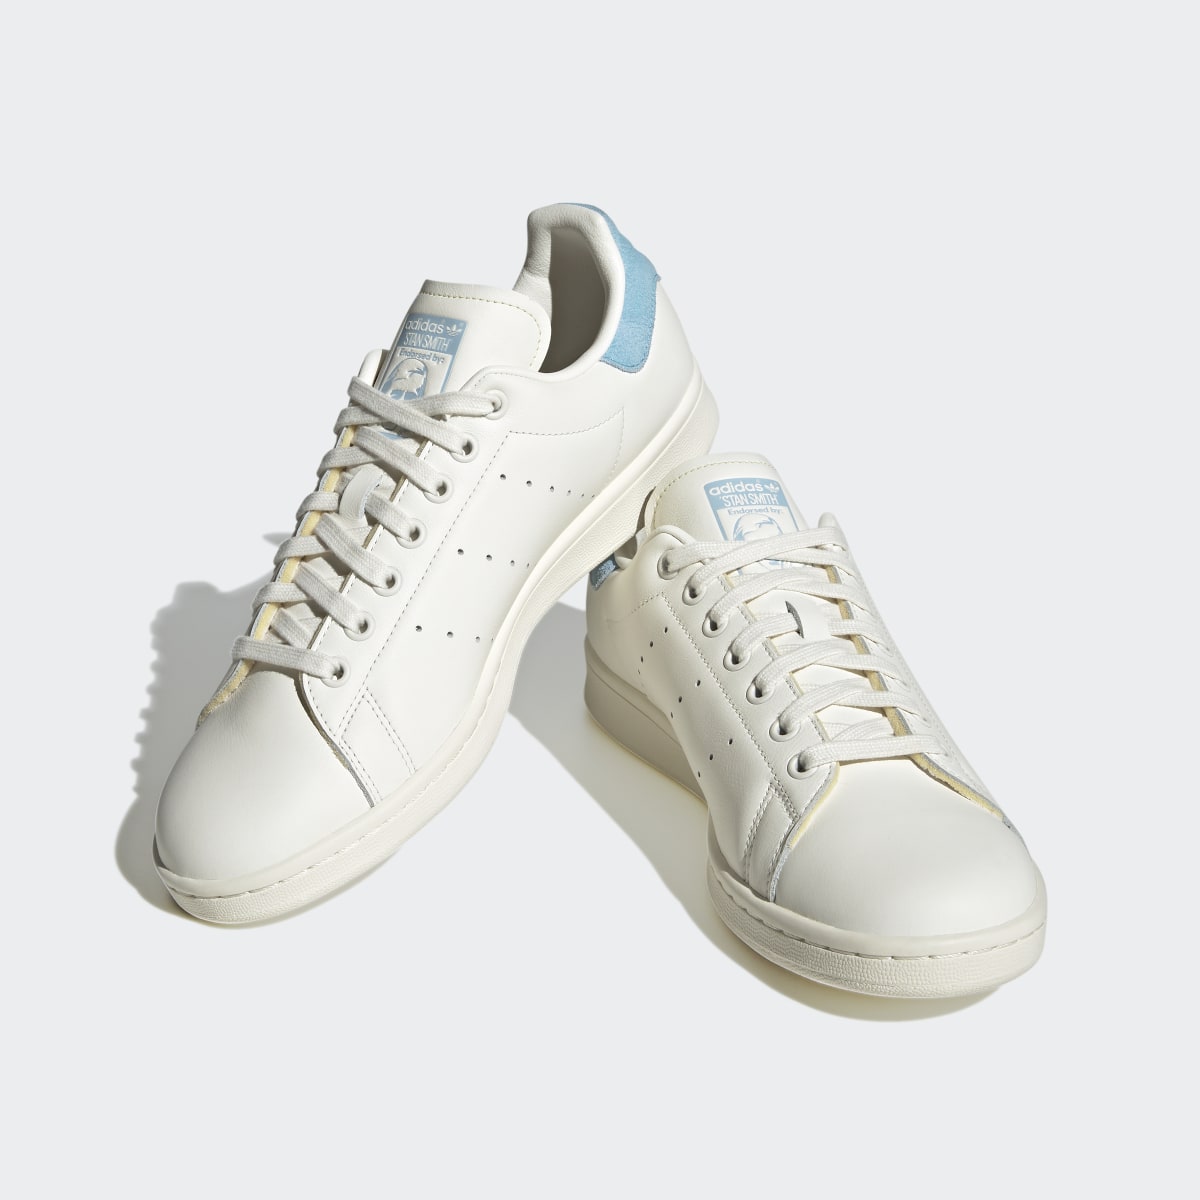 Adidas Stan Smith Shoes. 6